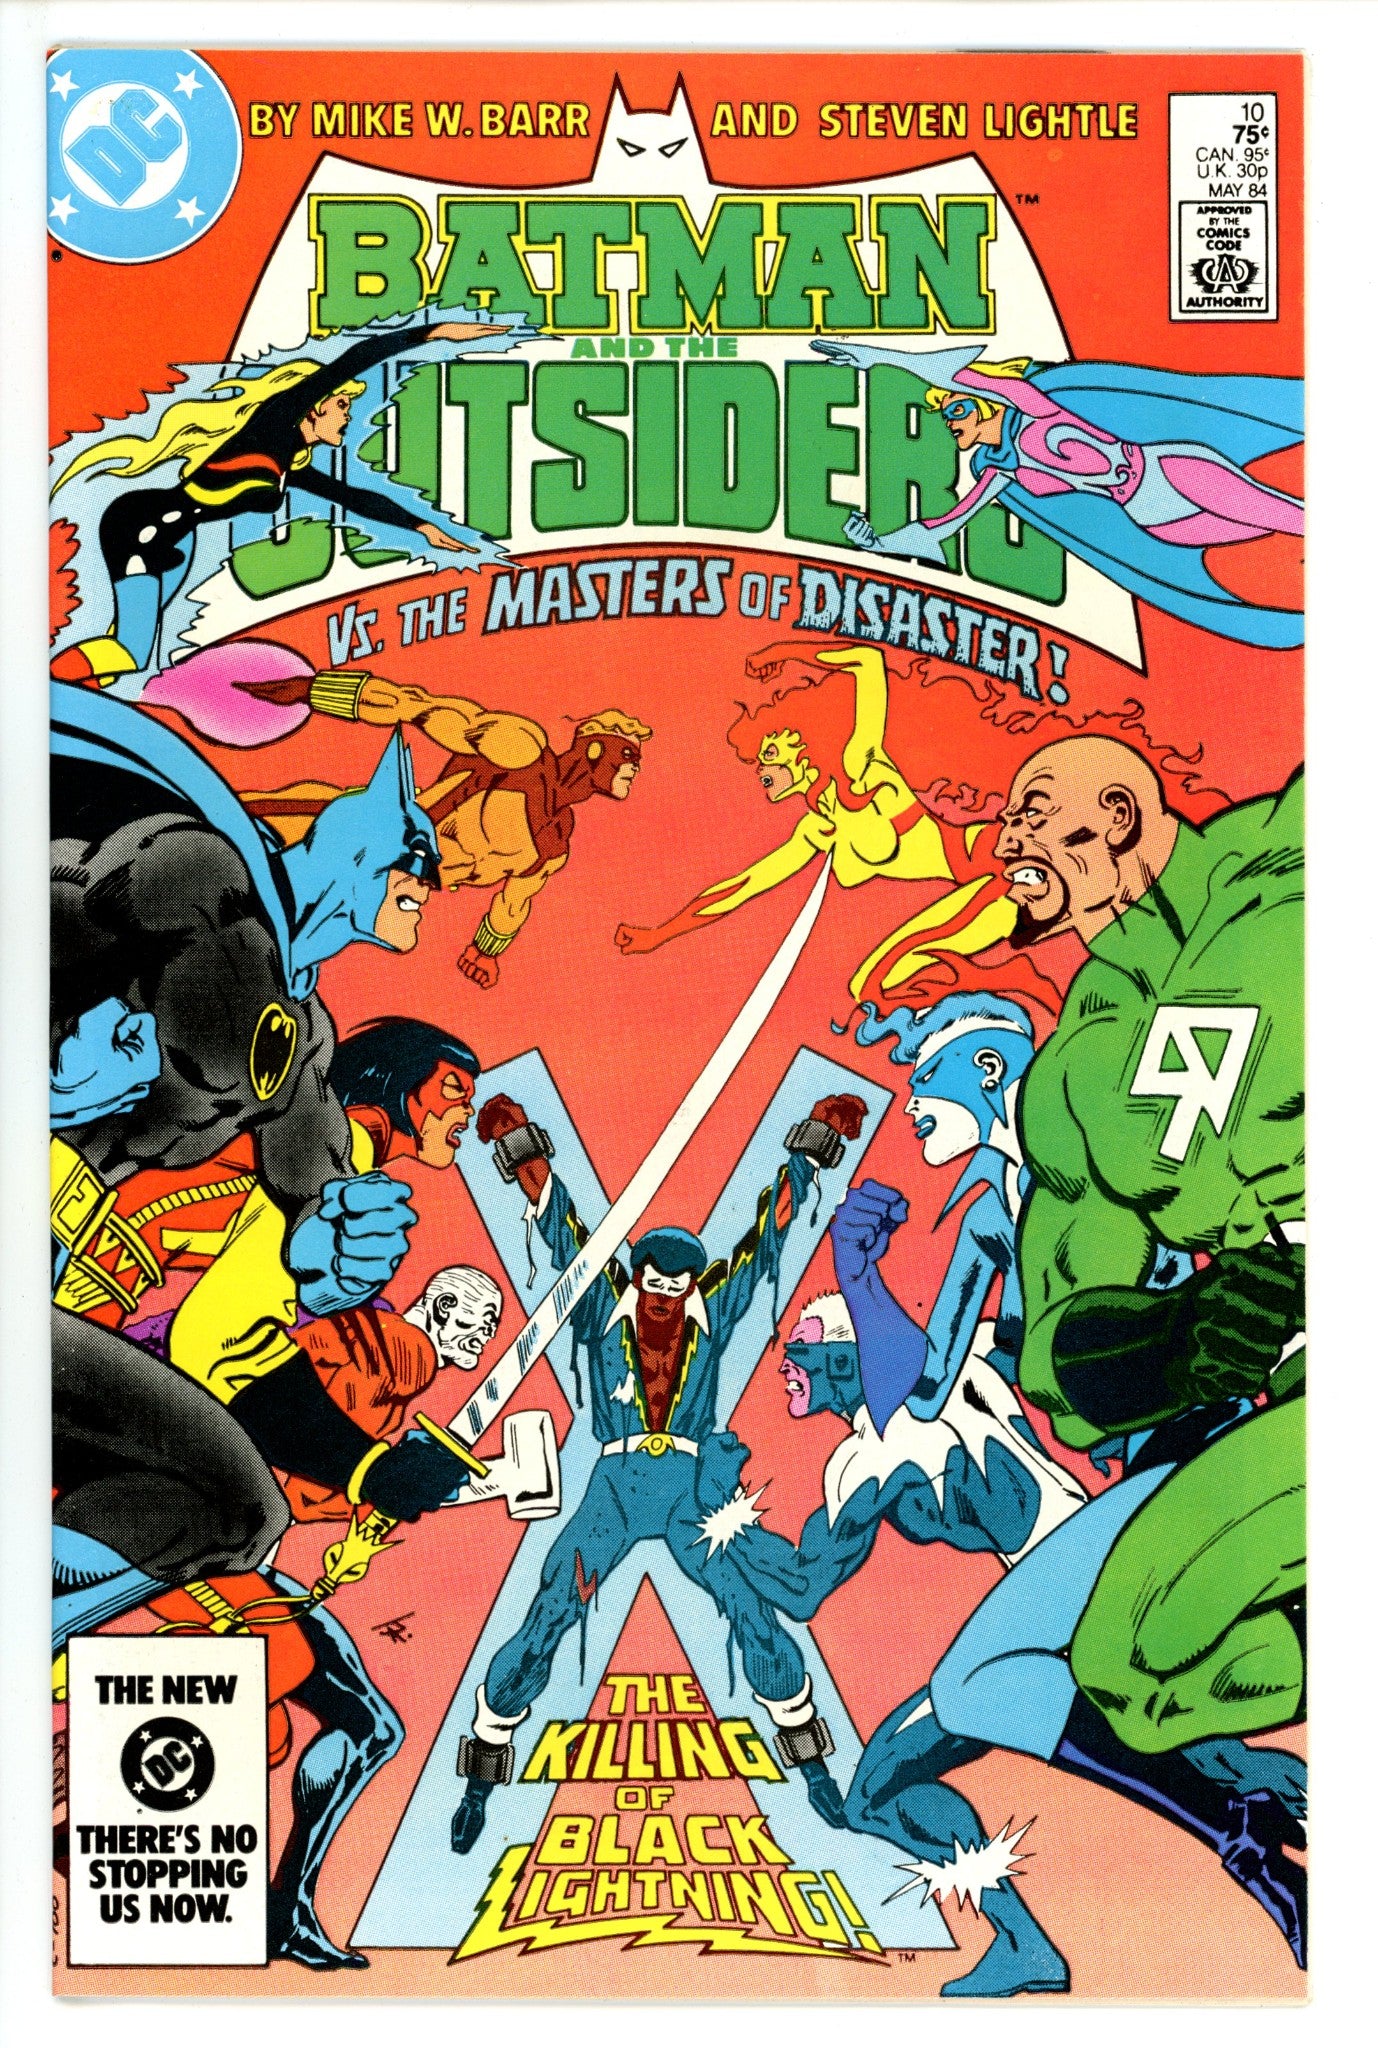 Batman and the Outsiders Vol 1 10 (1984)